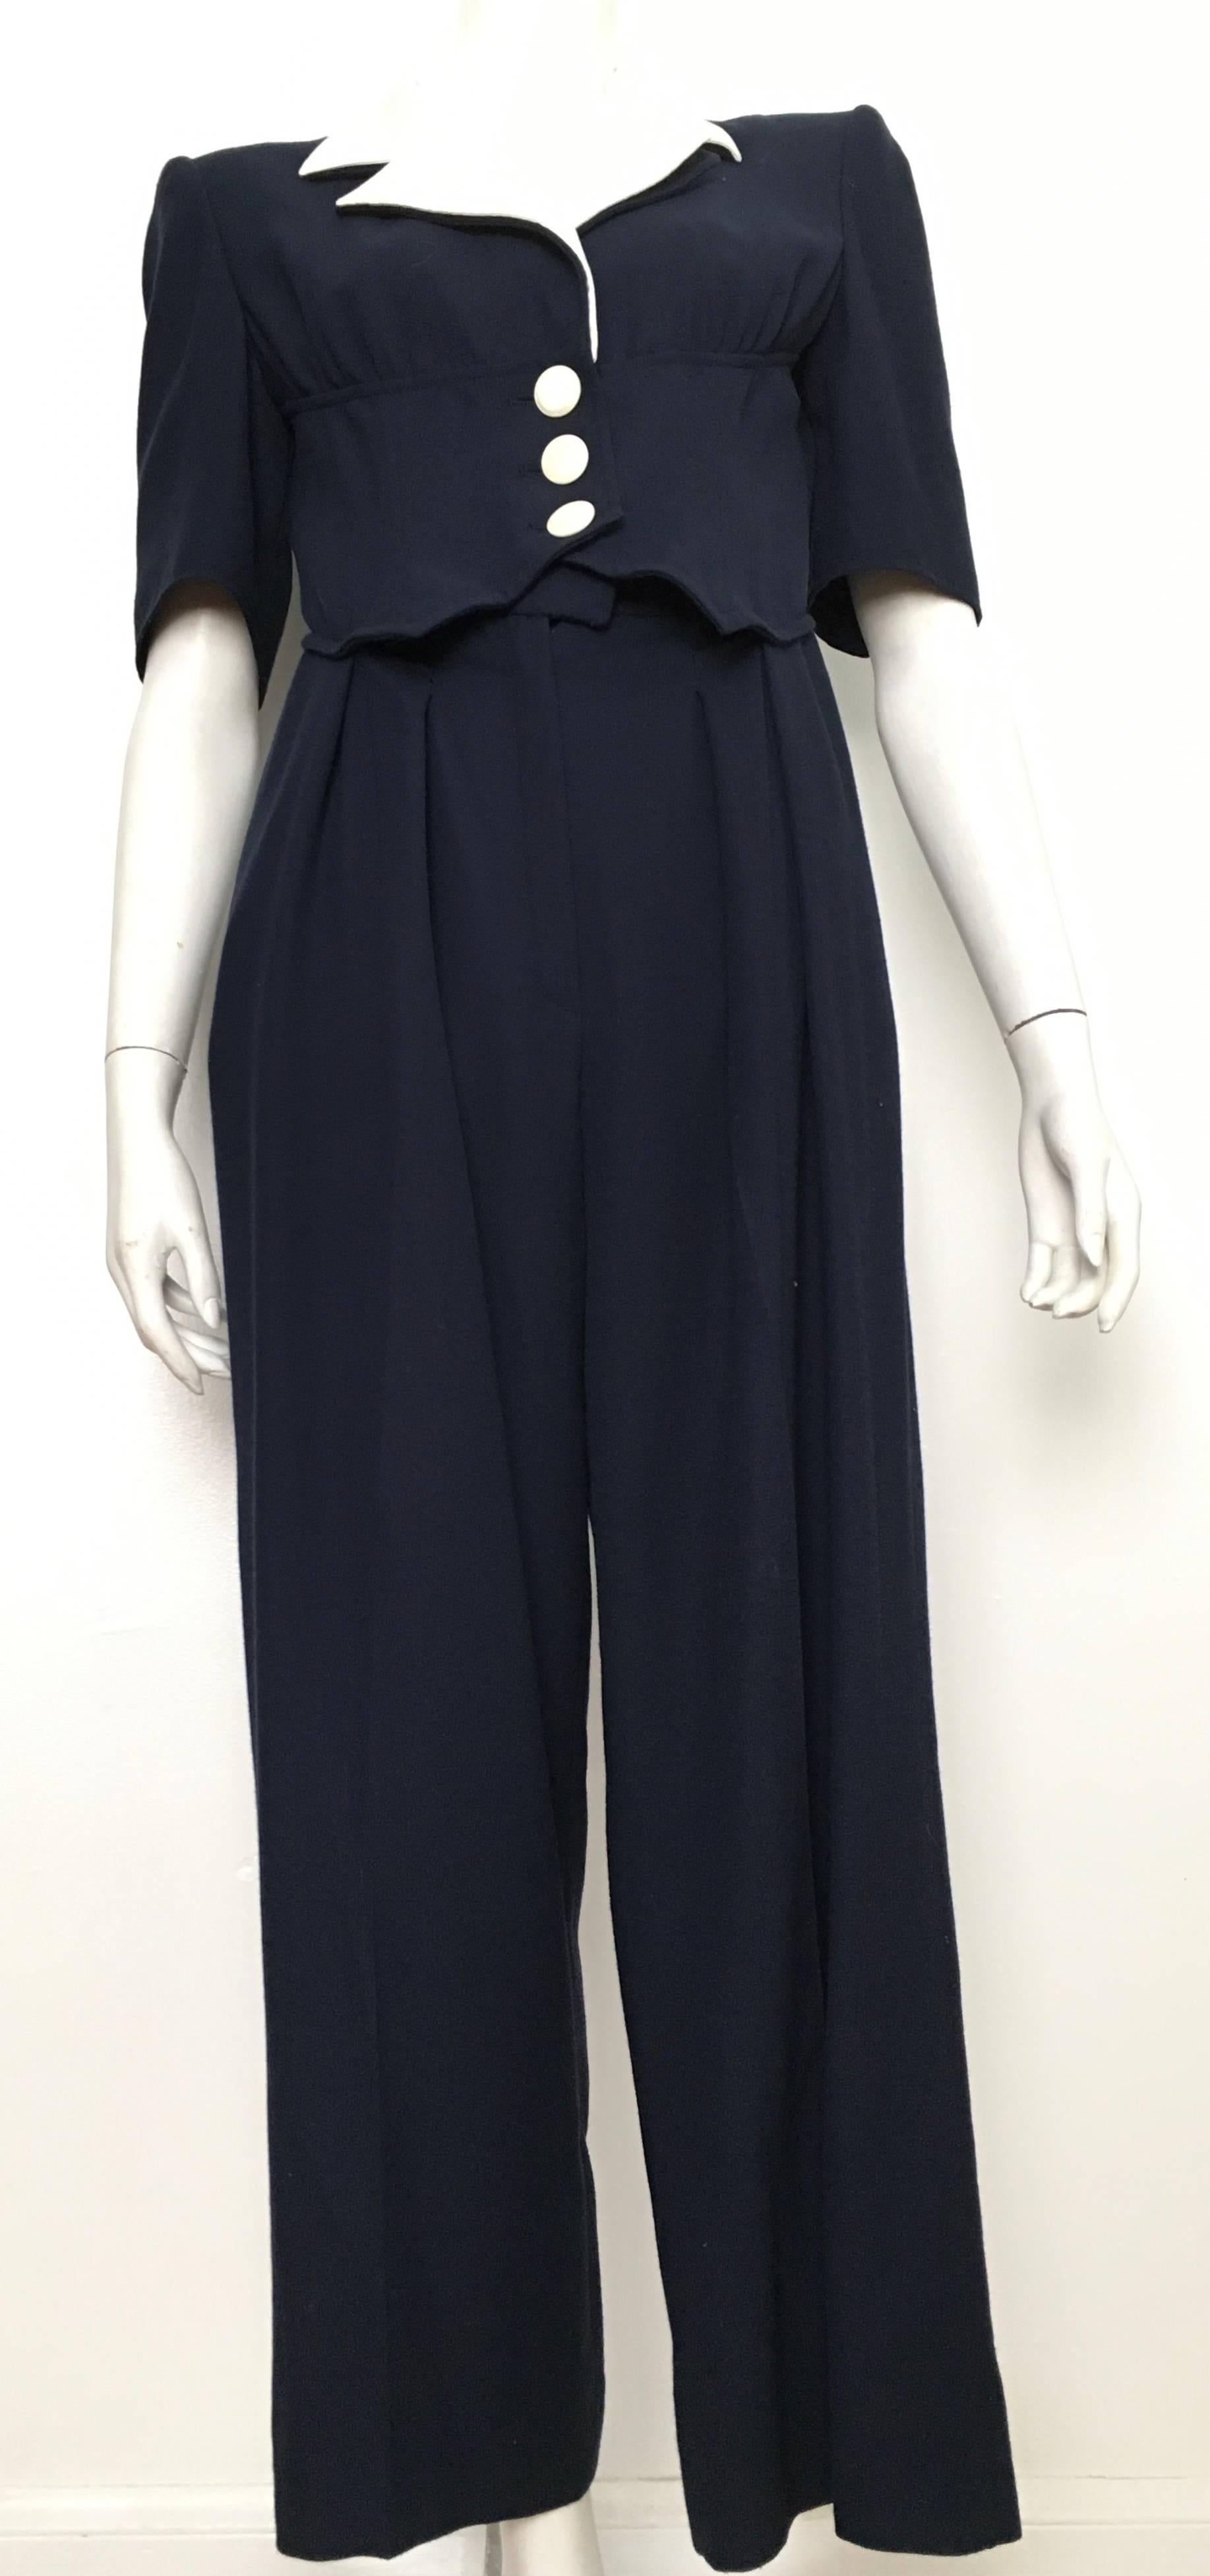 Valentino Boutique 1980s navy wool jumpsuit with pockets has white cotton collar trim is labeled a size 10 but fits like a size 6.  The waist is 28.1/2